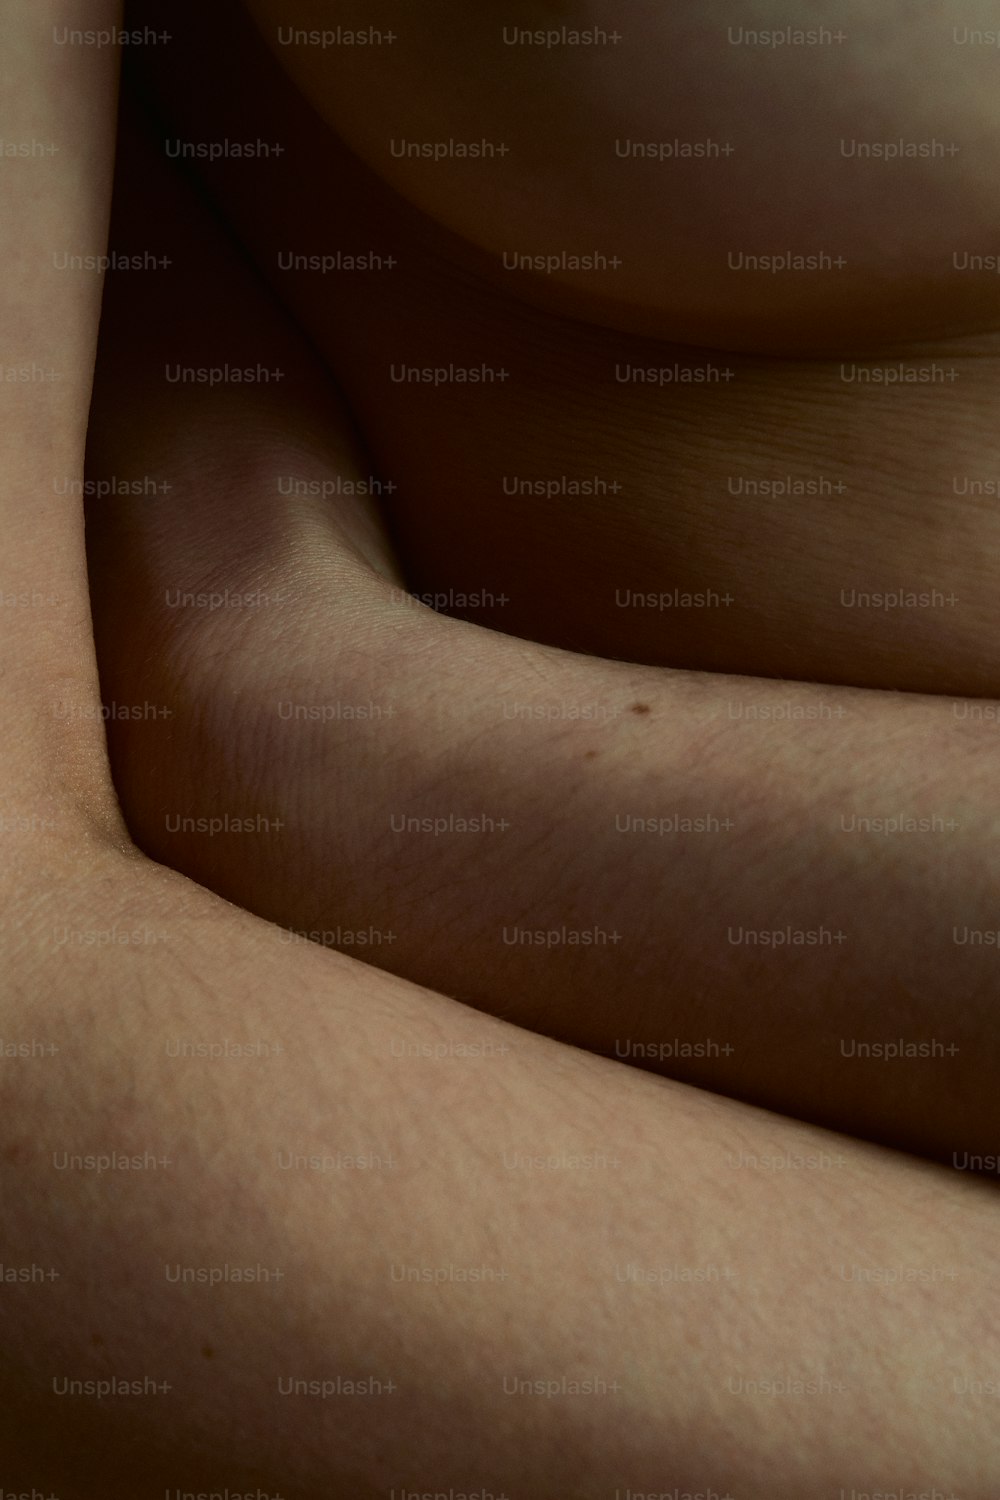 a close up of a person's arm with no shirt on